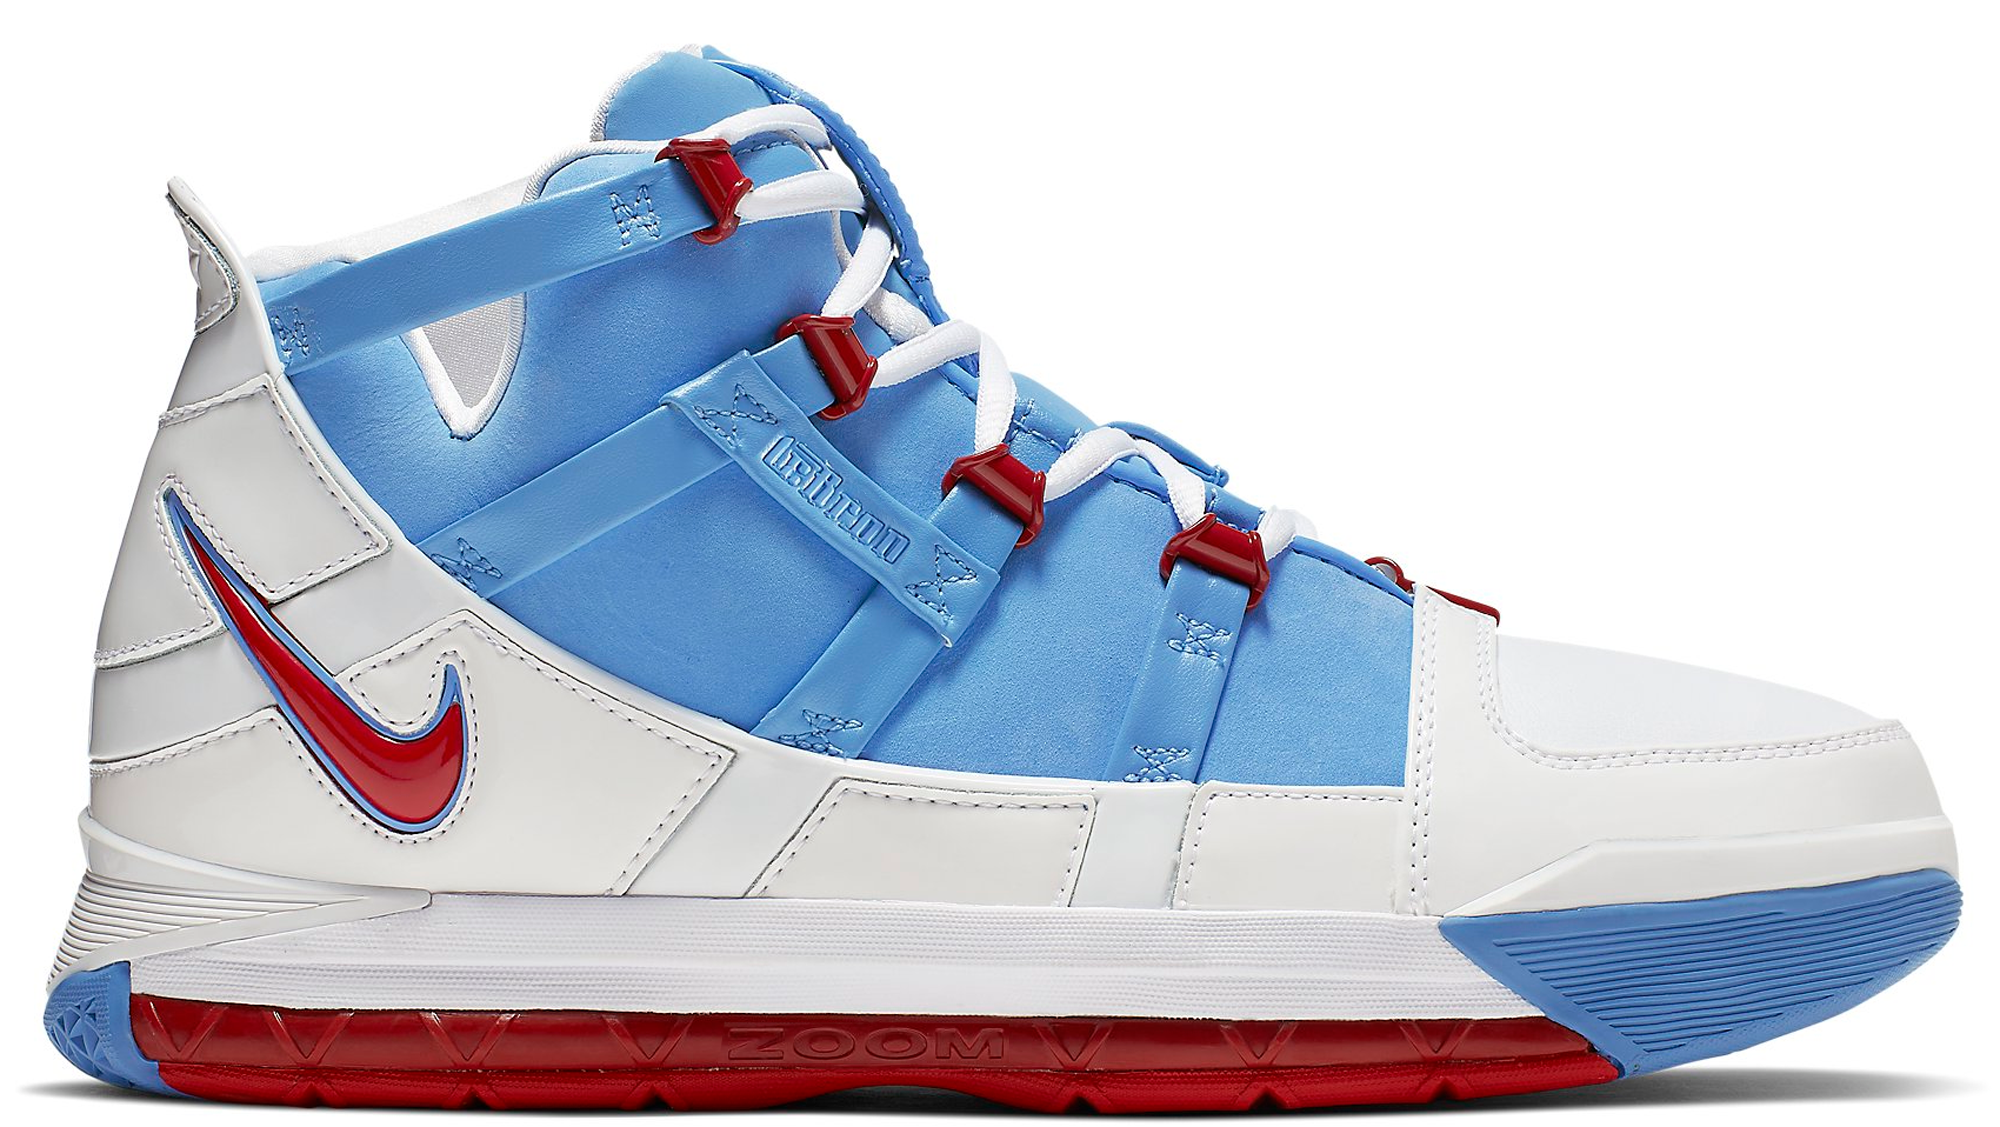 Nike LeBron 3 Shoes - Release Date